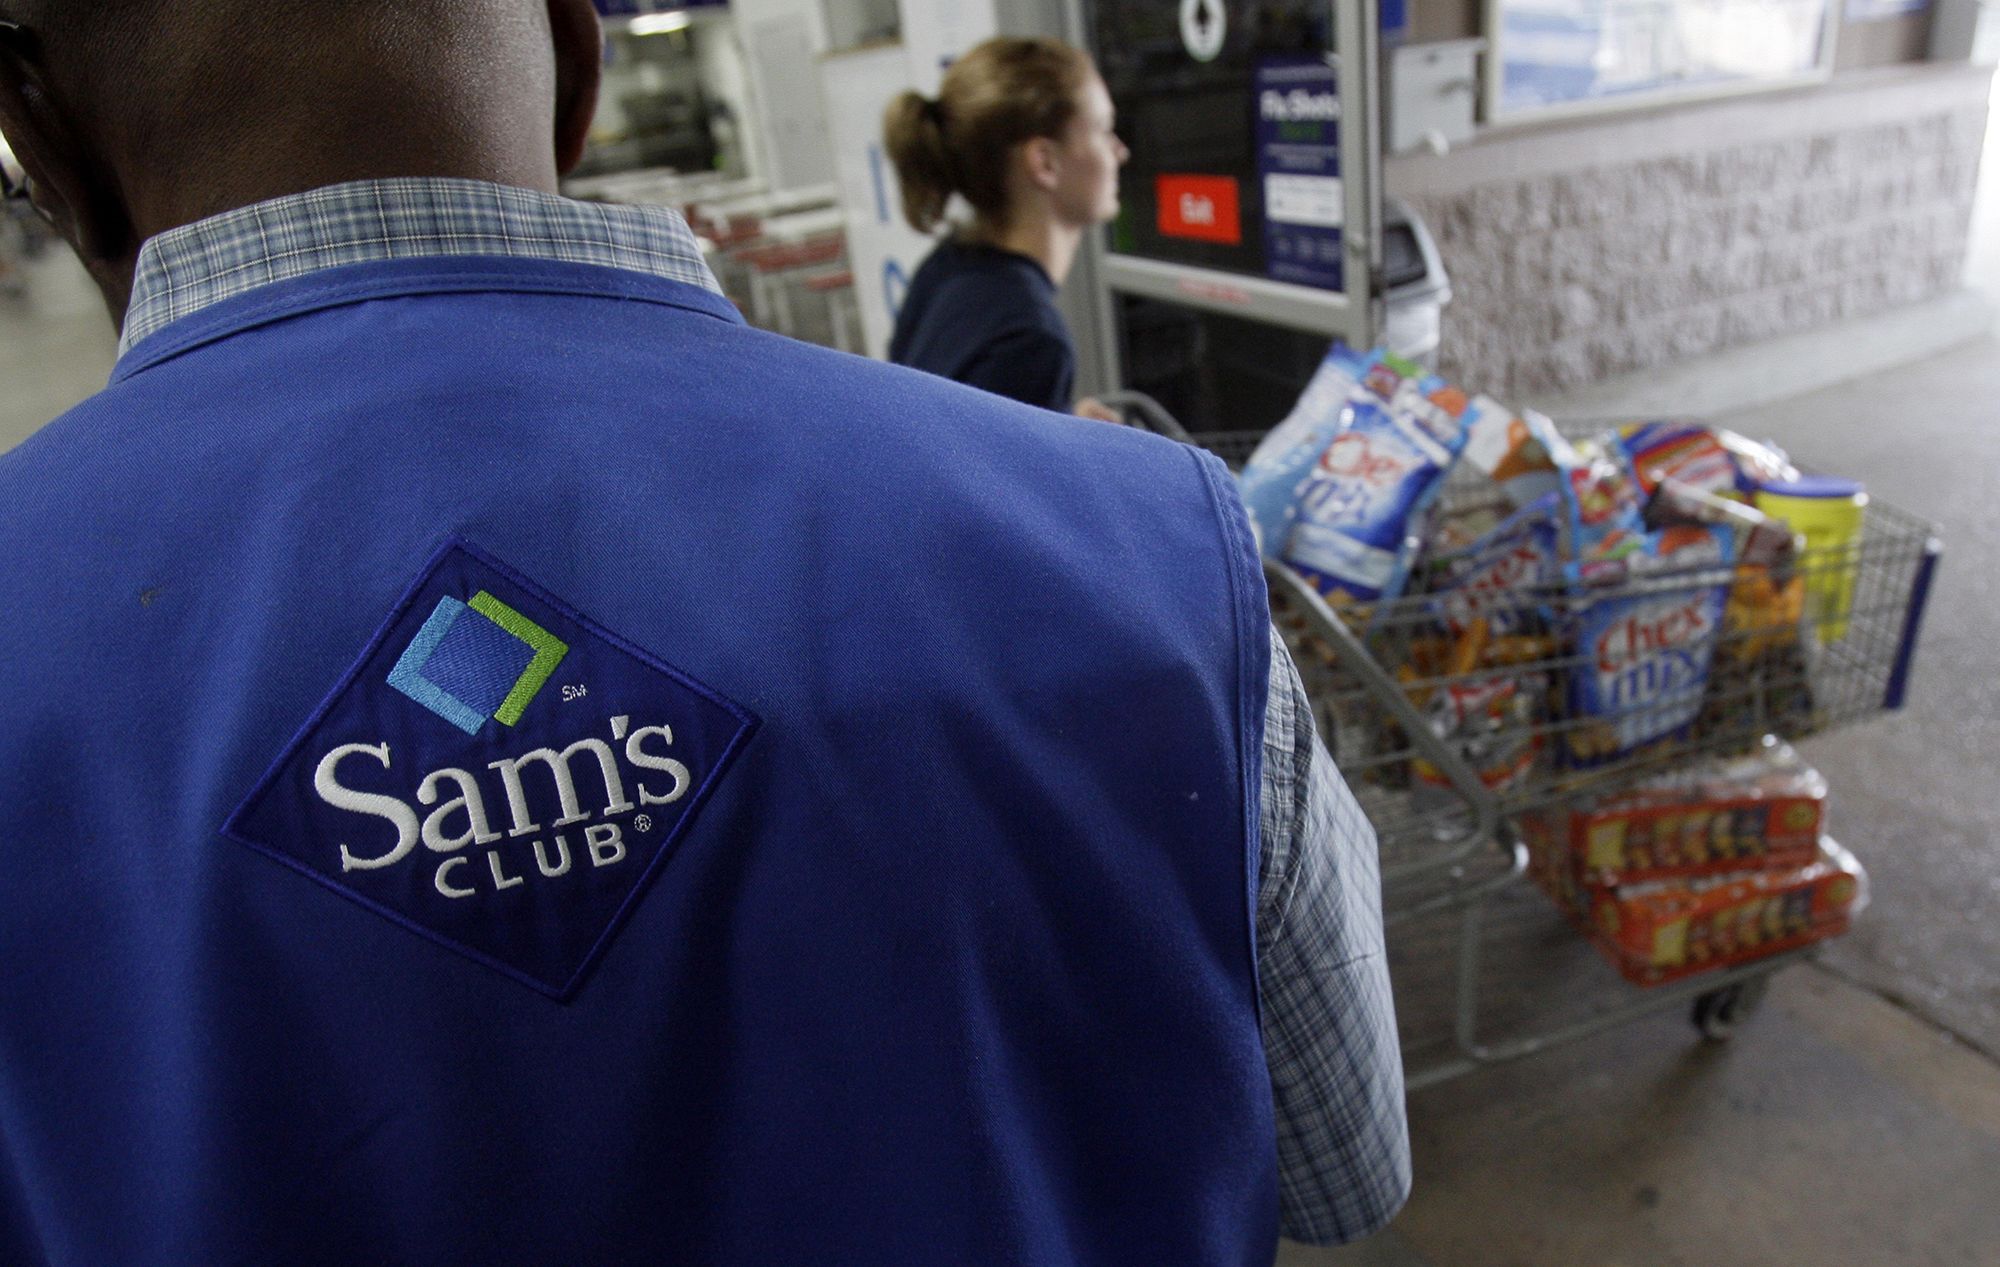 Sam's Club offers $25 annual membership this March